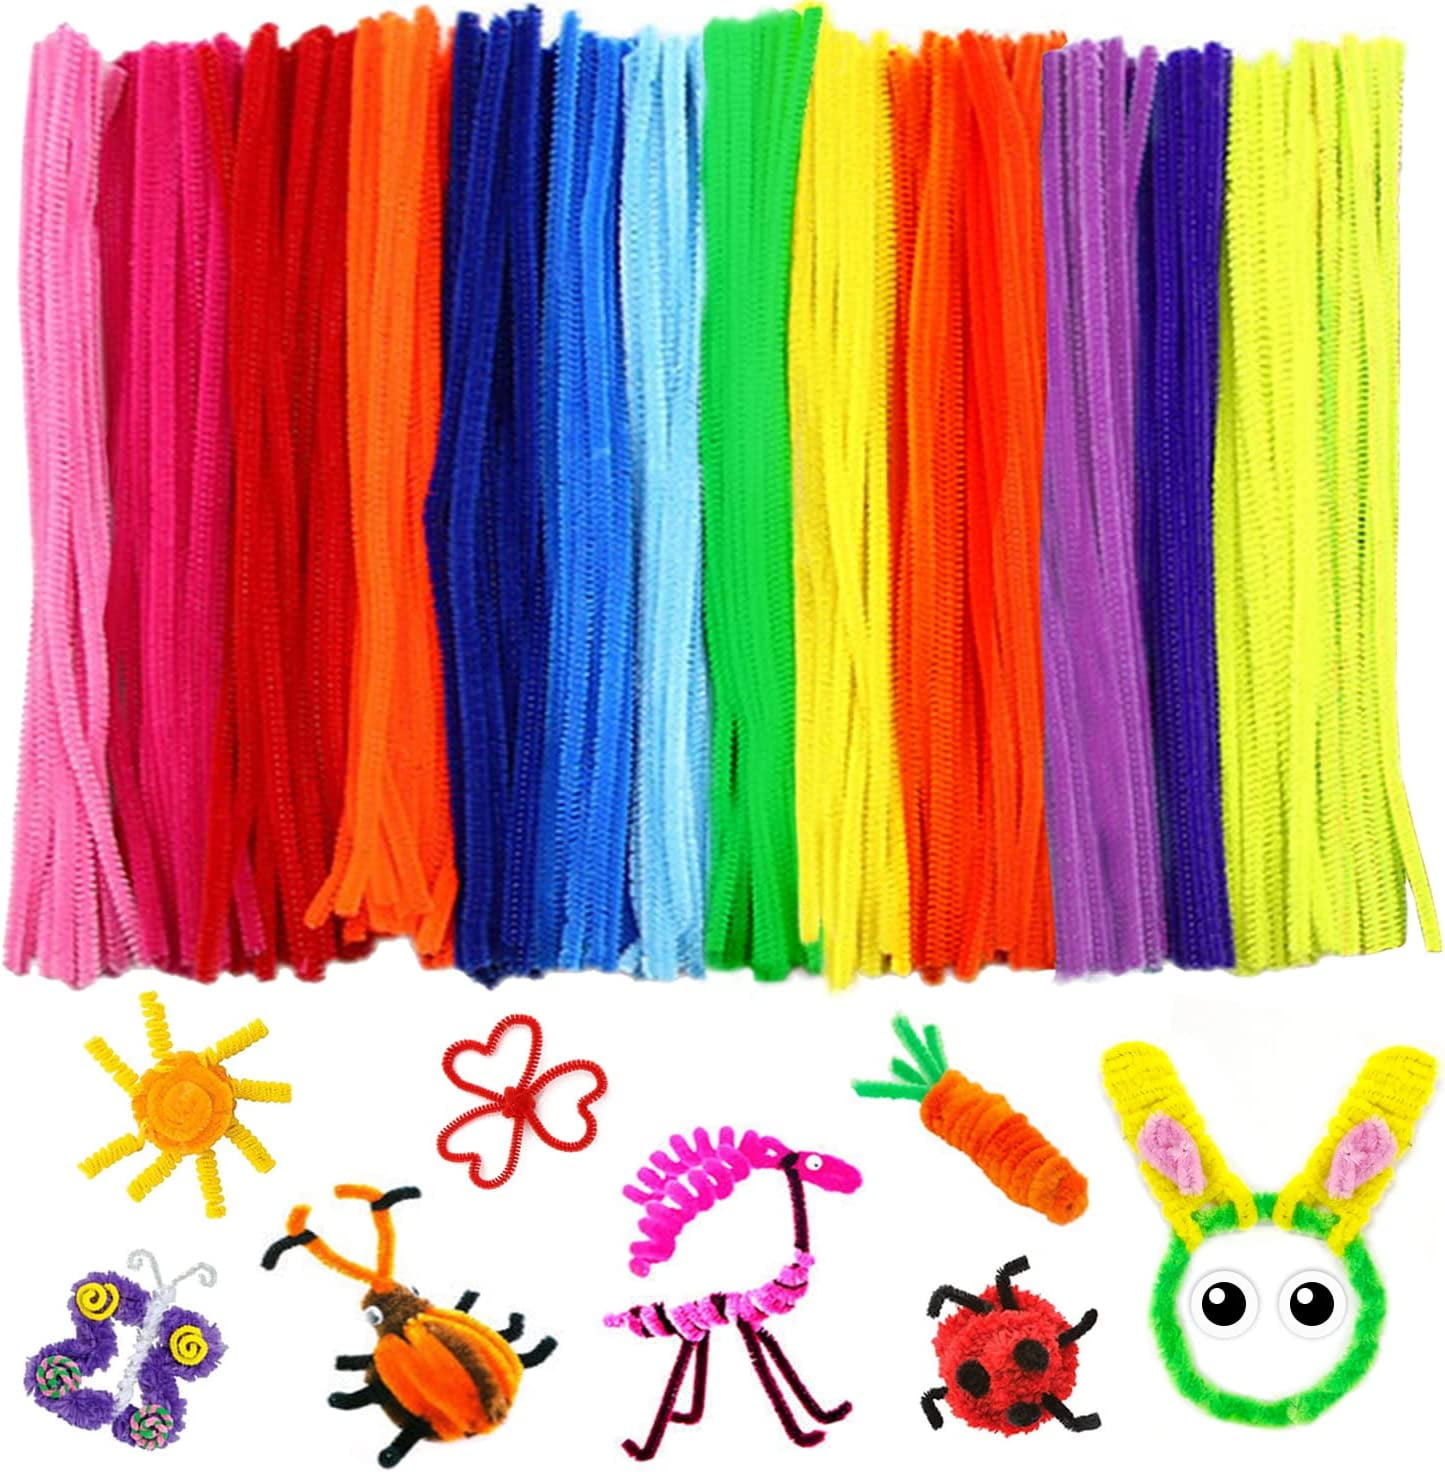 Pipe Cleaners Diy Craft Chenille Stems Supplies Stem Crafts Material Wiki  Sticks Kids Bulk Pastel Toys Assorted Colors - AliExpress